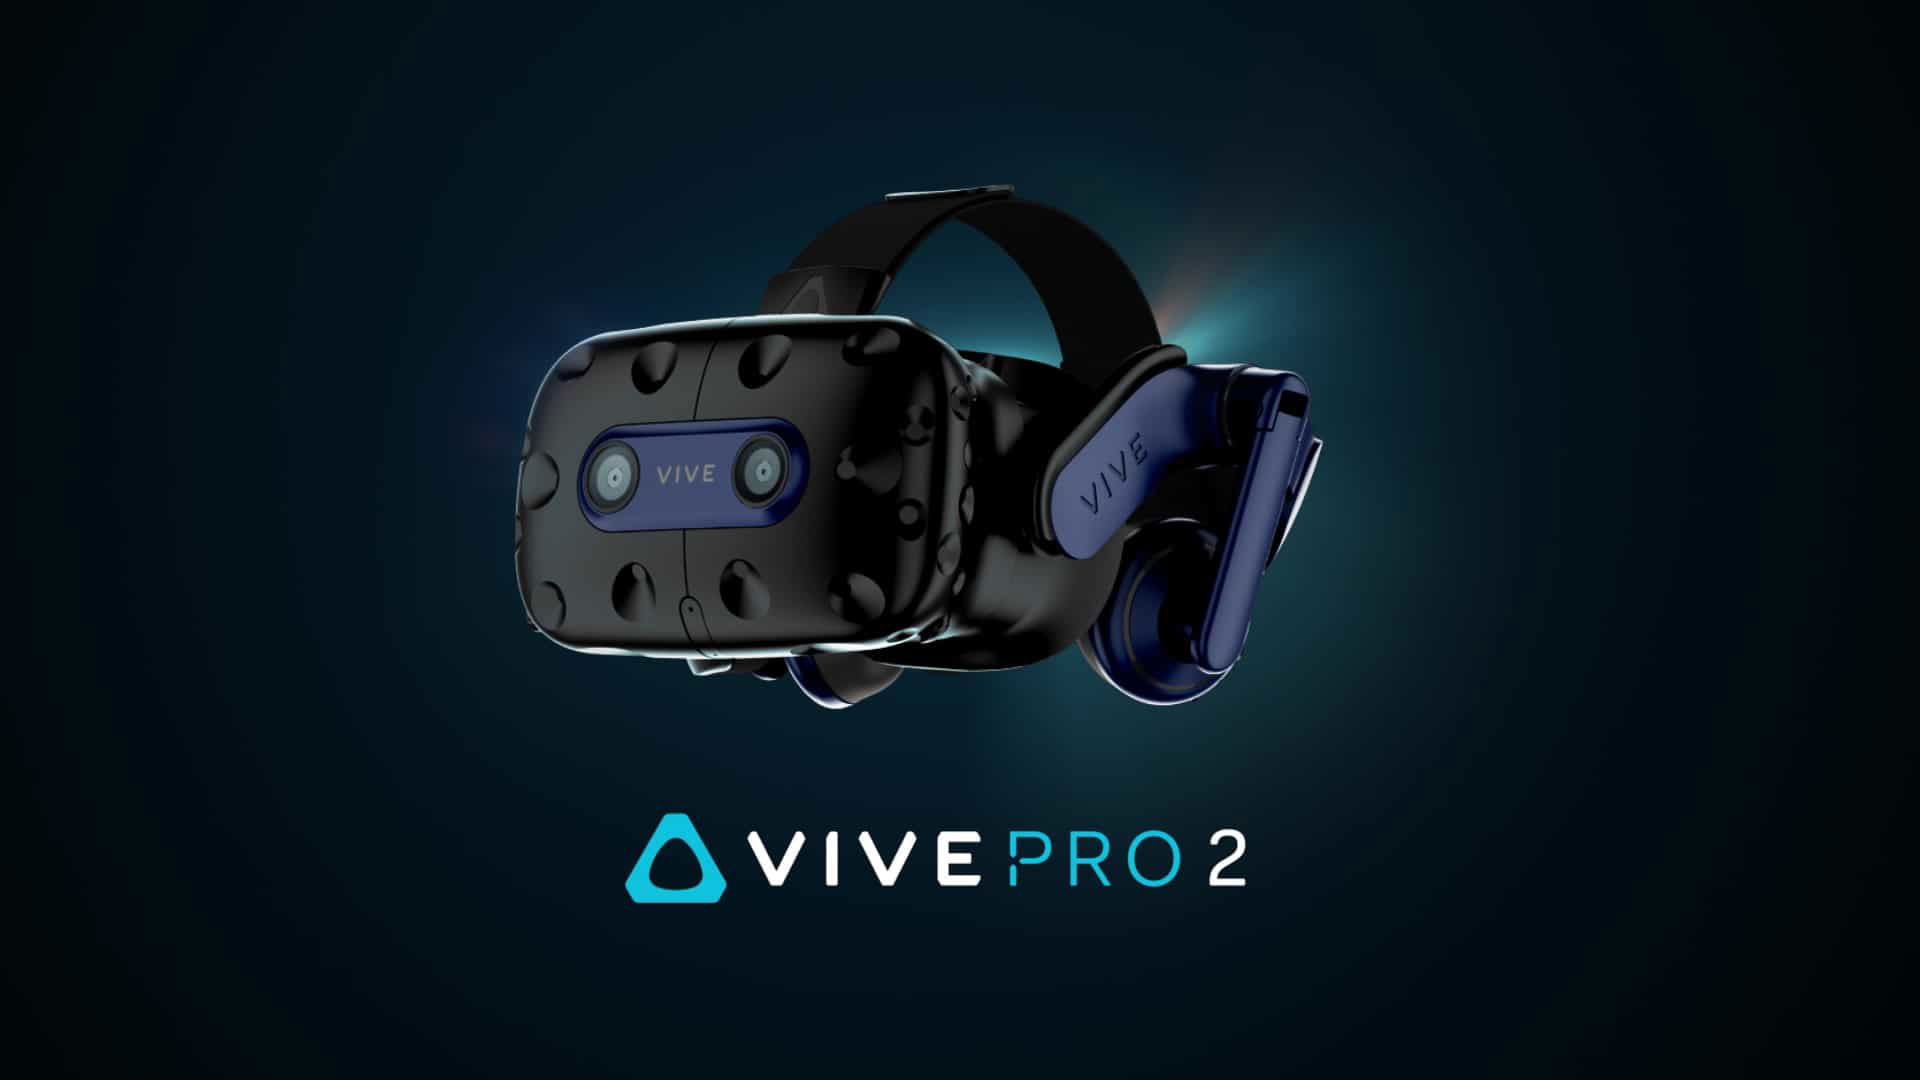 The HTC Vive Pro 2 virtual reality headset is a high-end model.